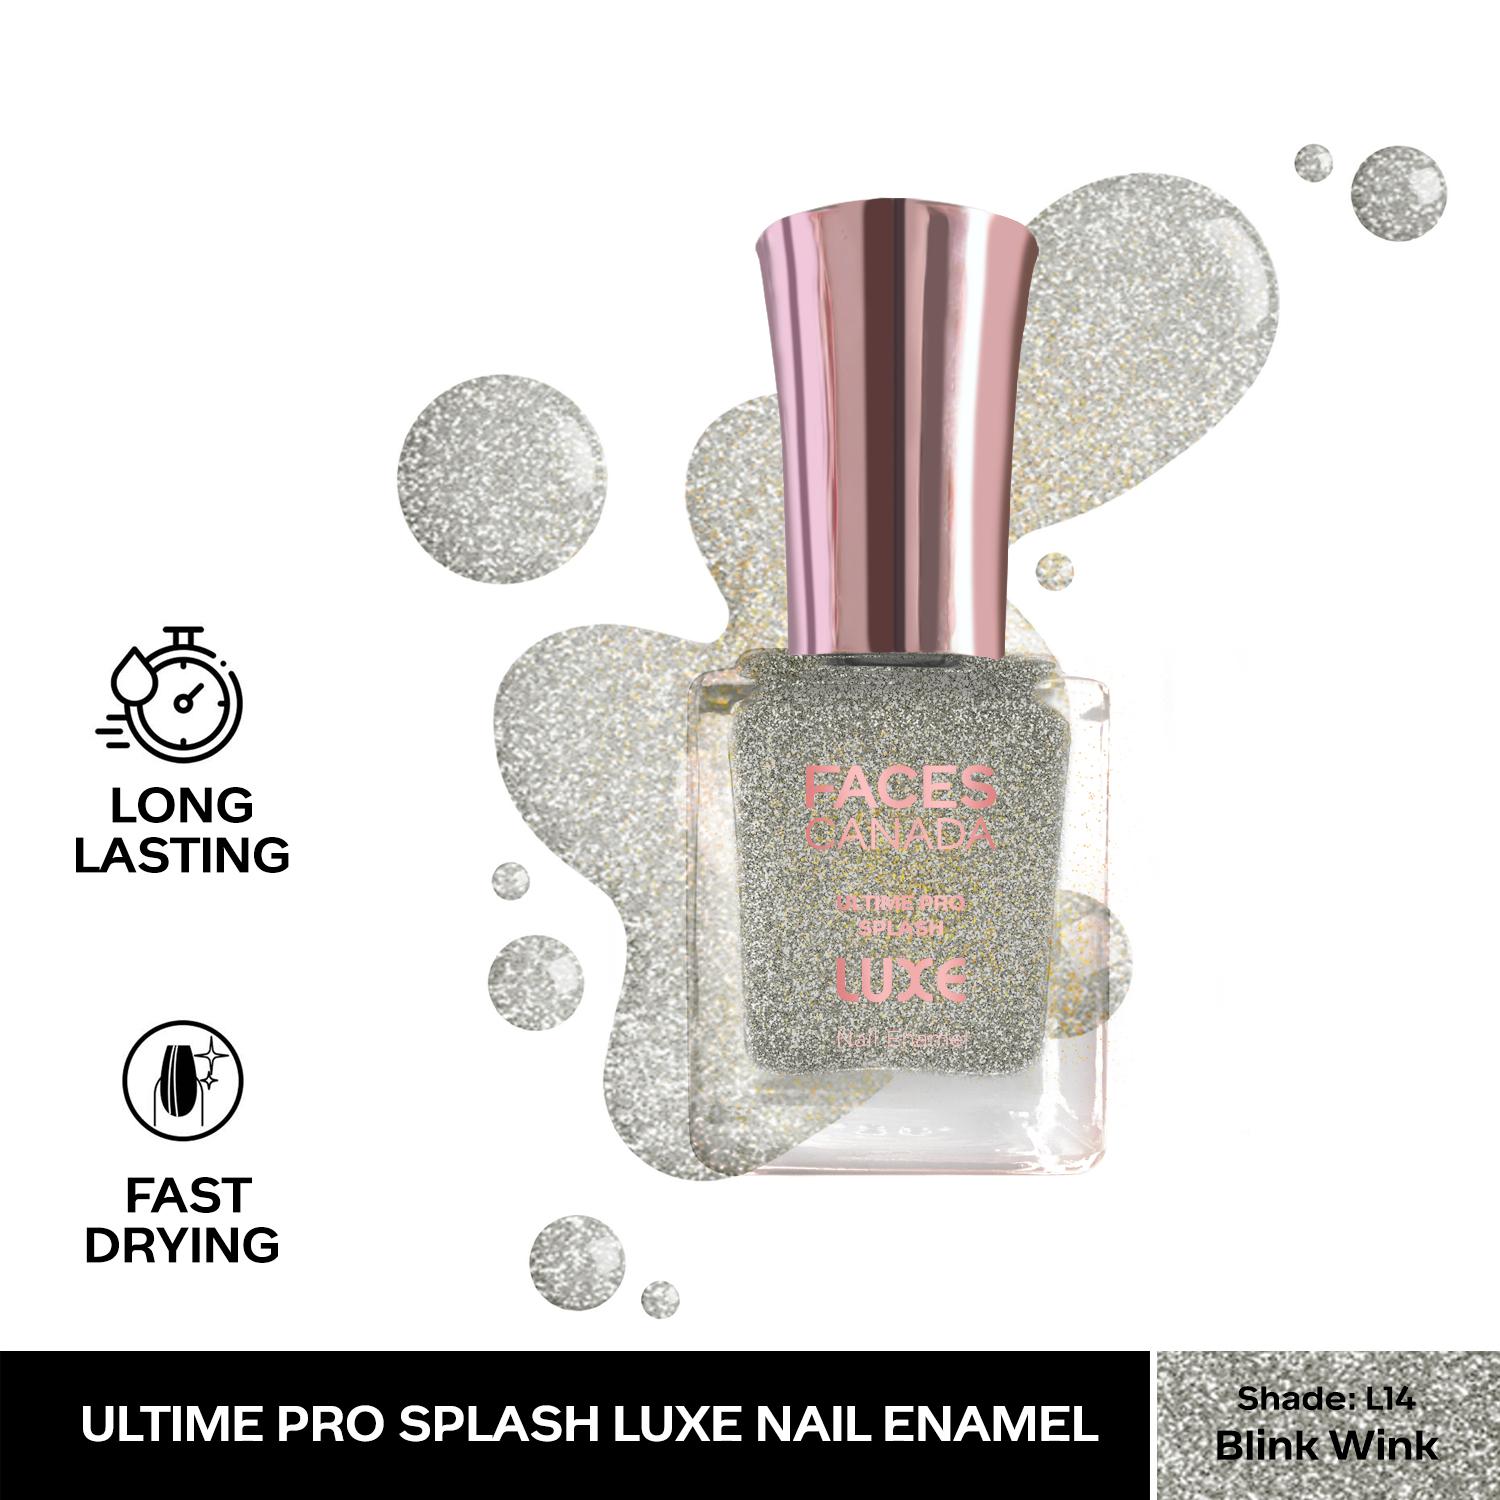 Faces Canada | Faces Canada Ultime Pro Splash Luxe Nail Enamel - Blink Wink (L14), Glossy Finish (12 ml)